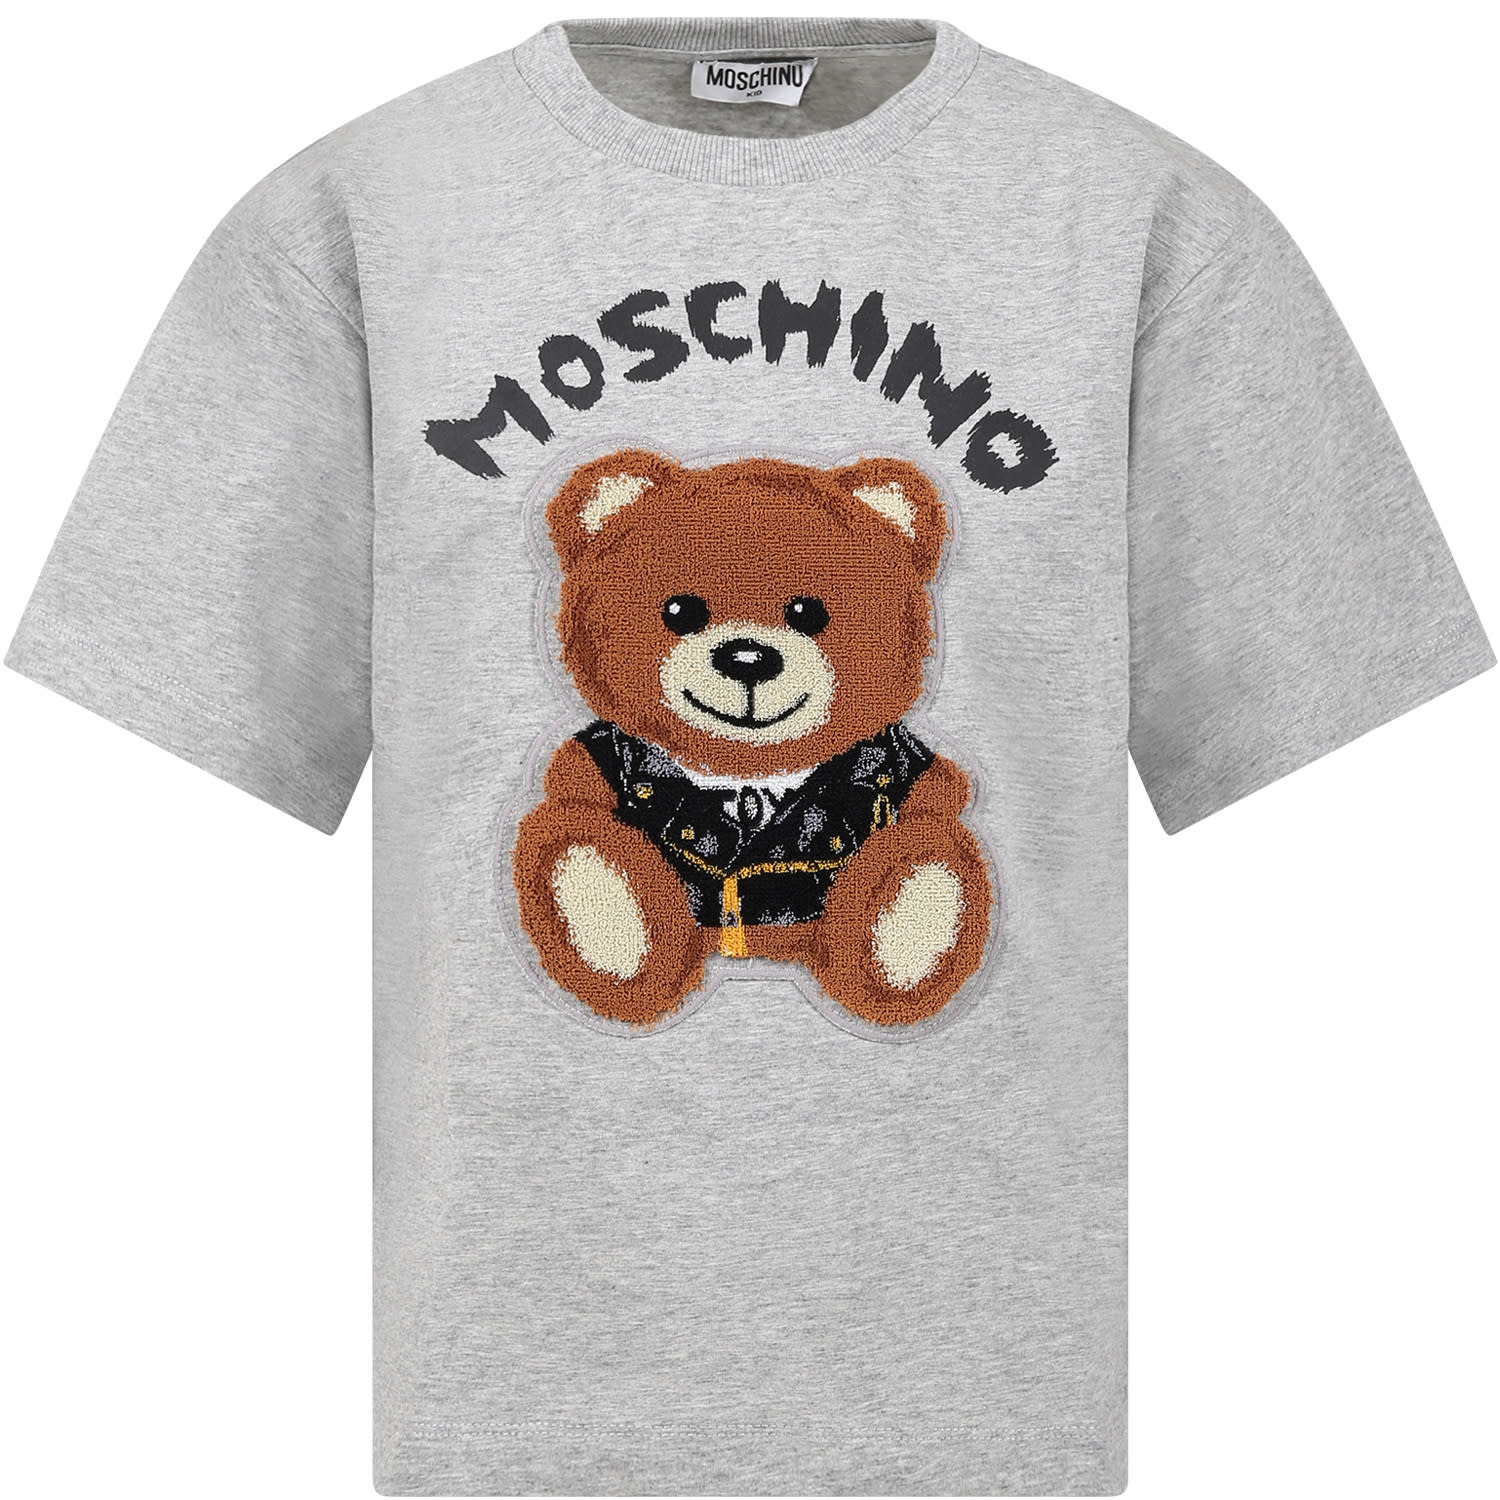 Moschino Gray T-shirt For Kids With Logo And Teddy Bear In Grey